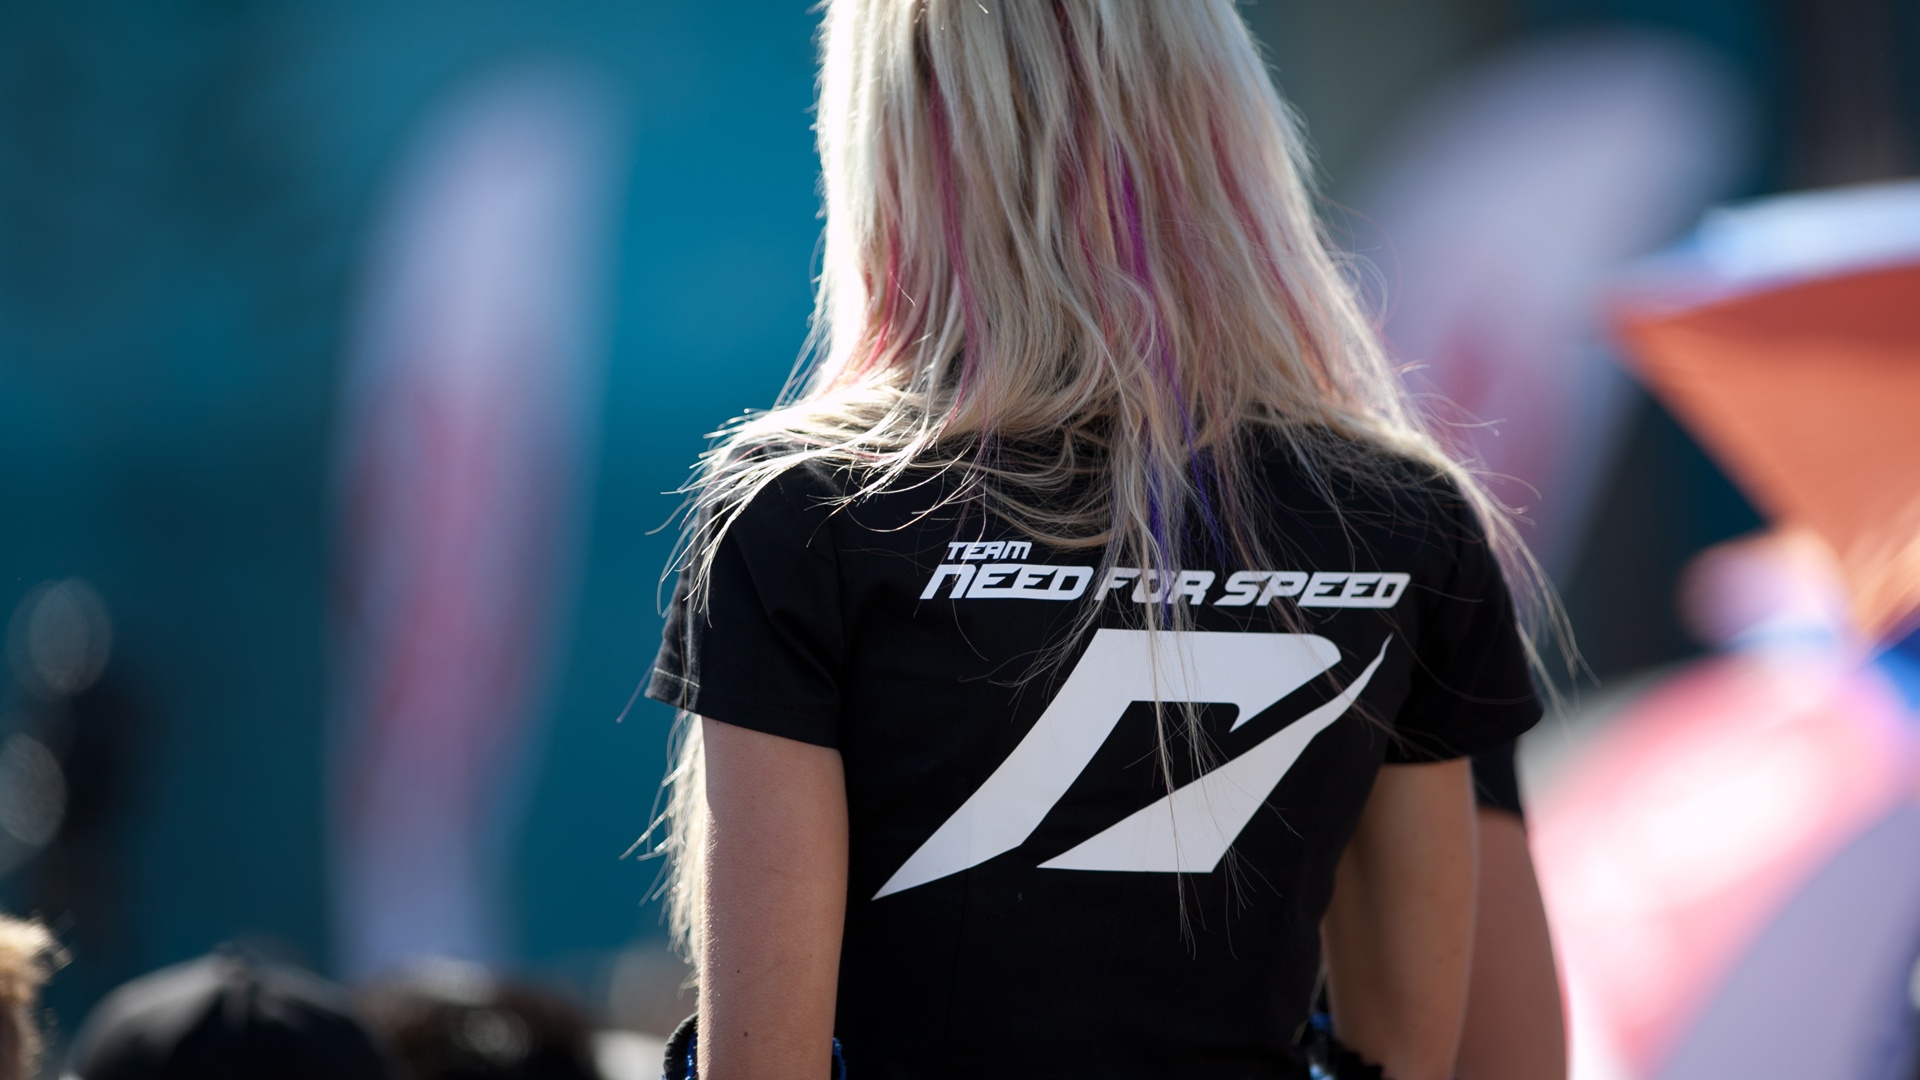 team_need_for_speed-1920x1080.jp